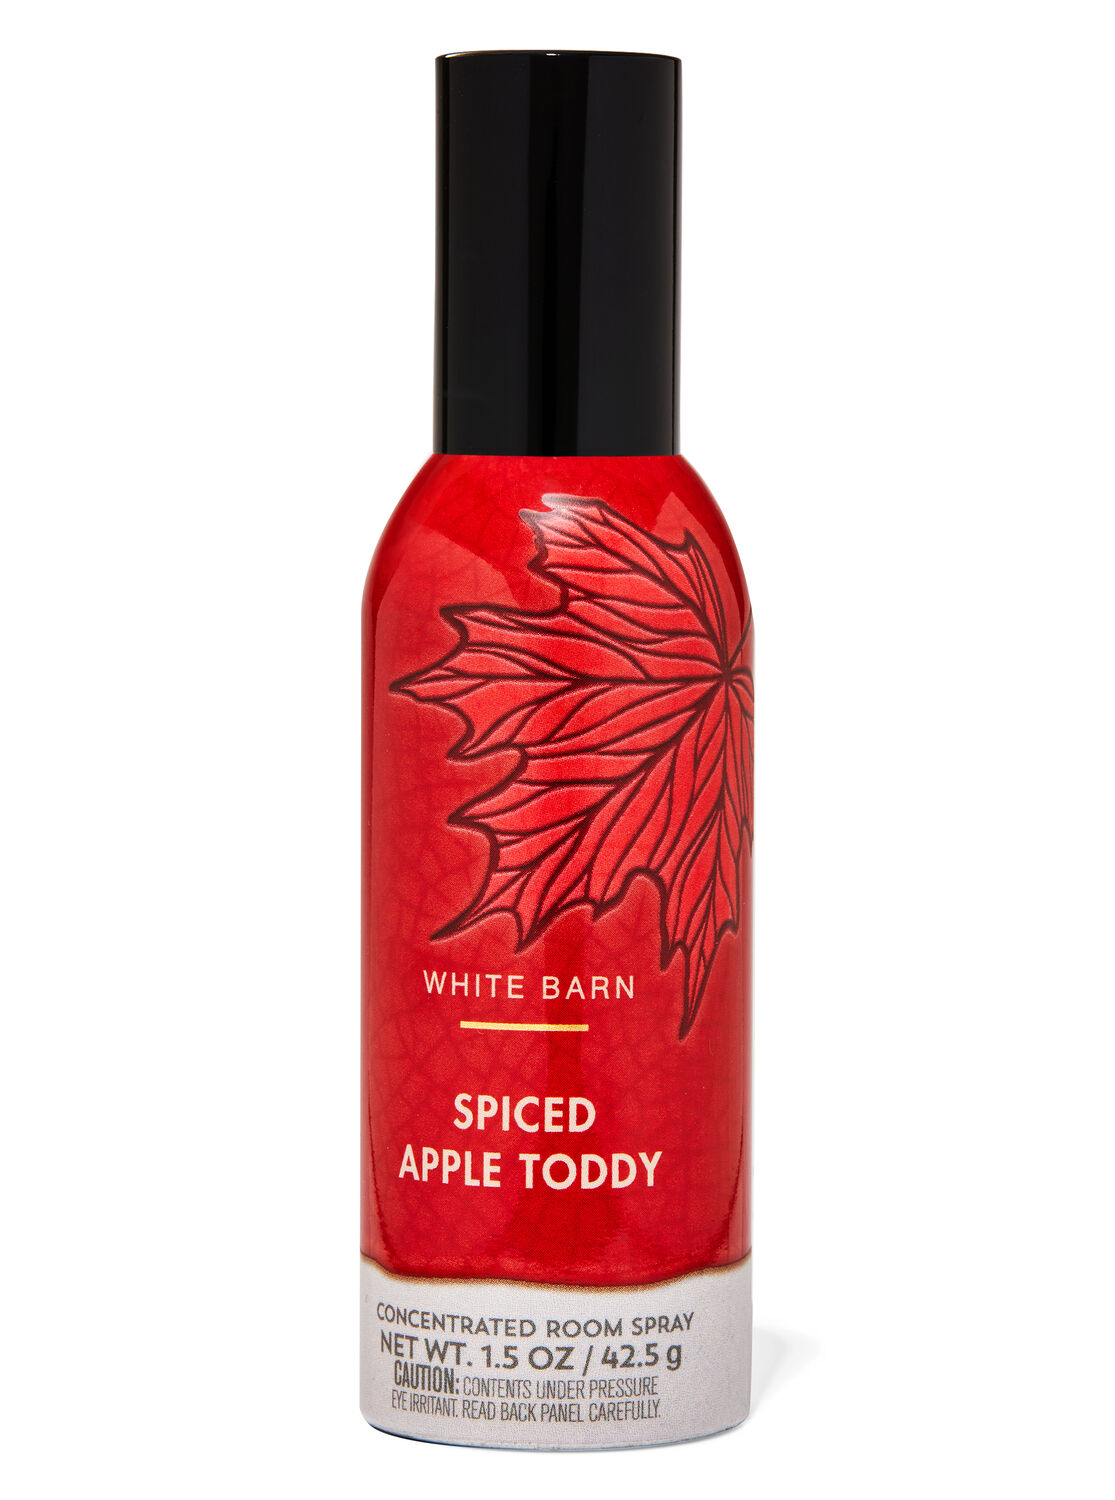 Spiced Apple Toddy Concentrated Room Spray